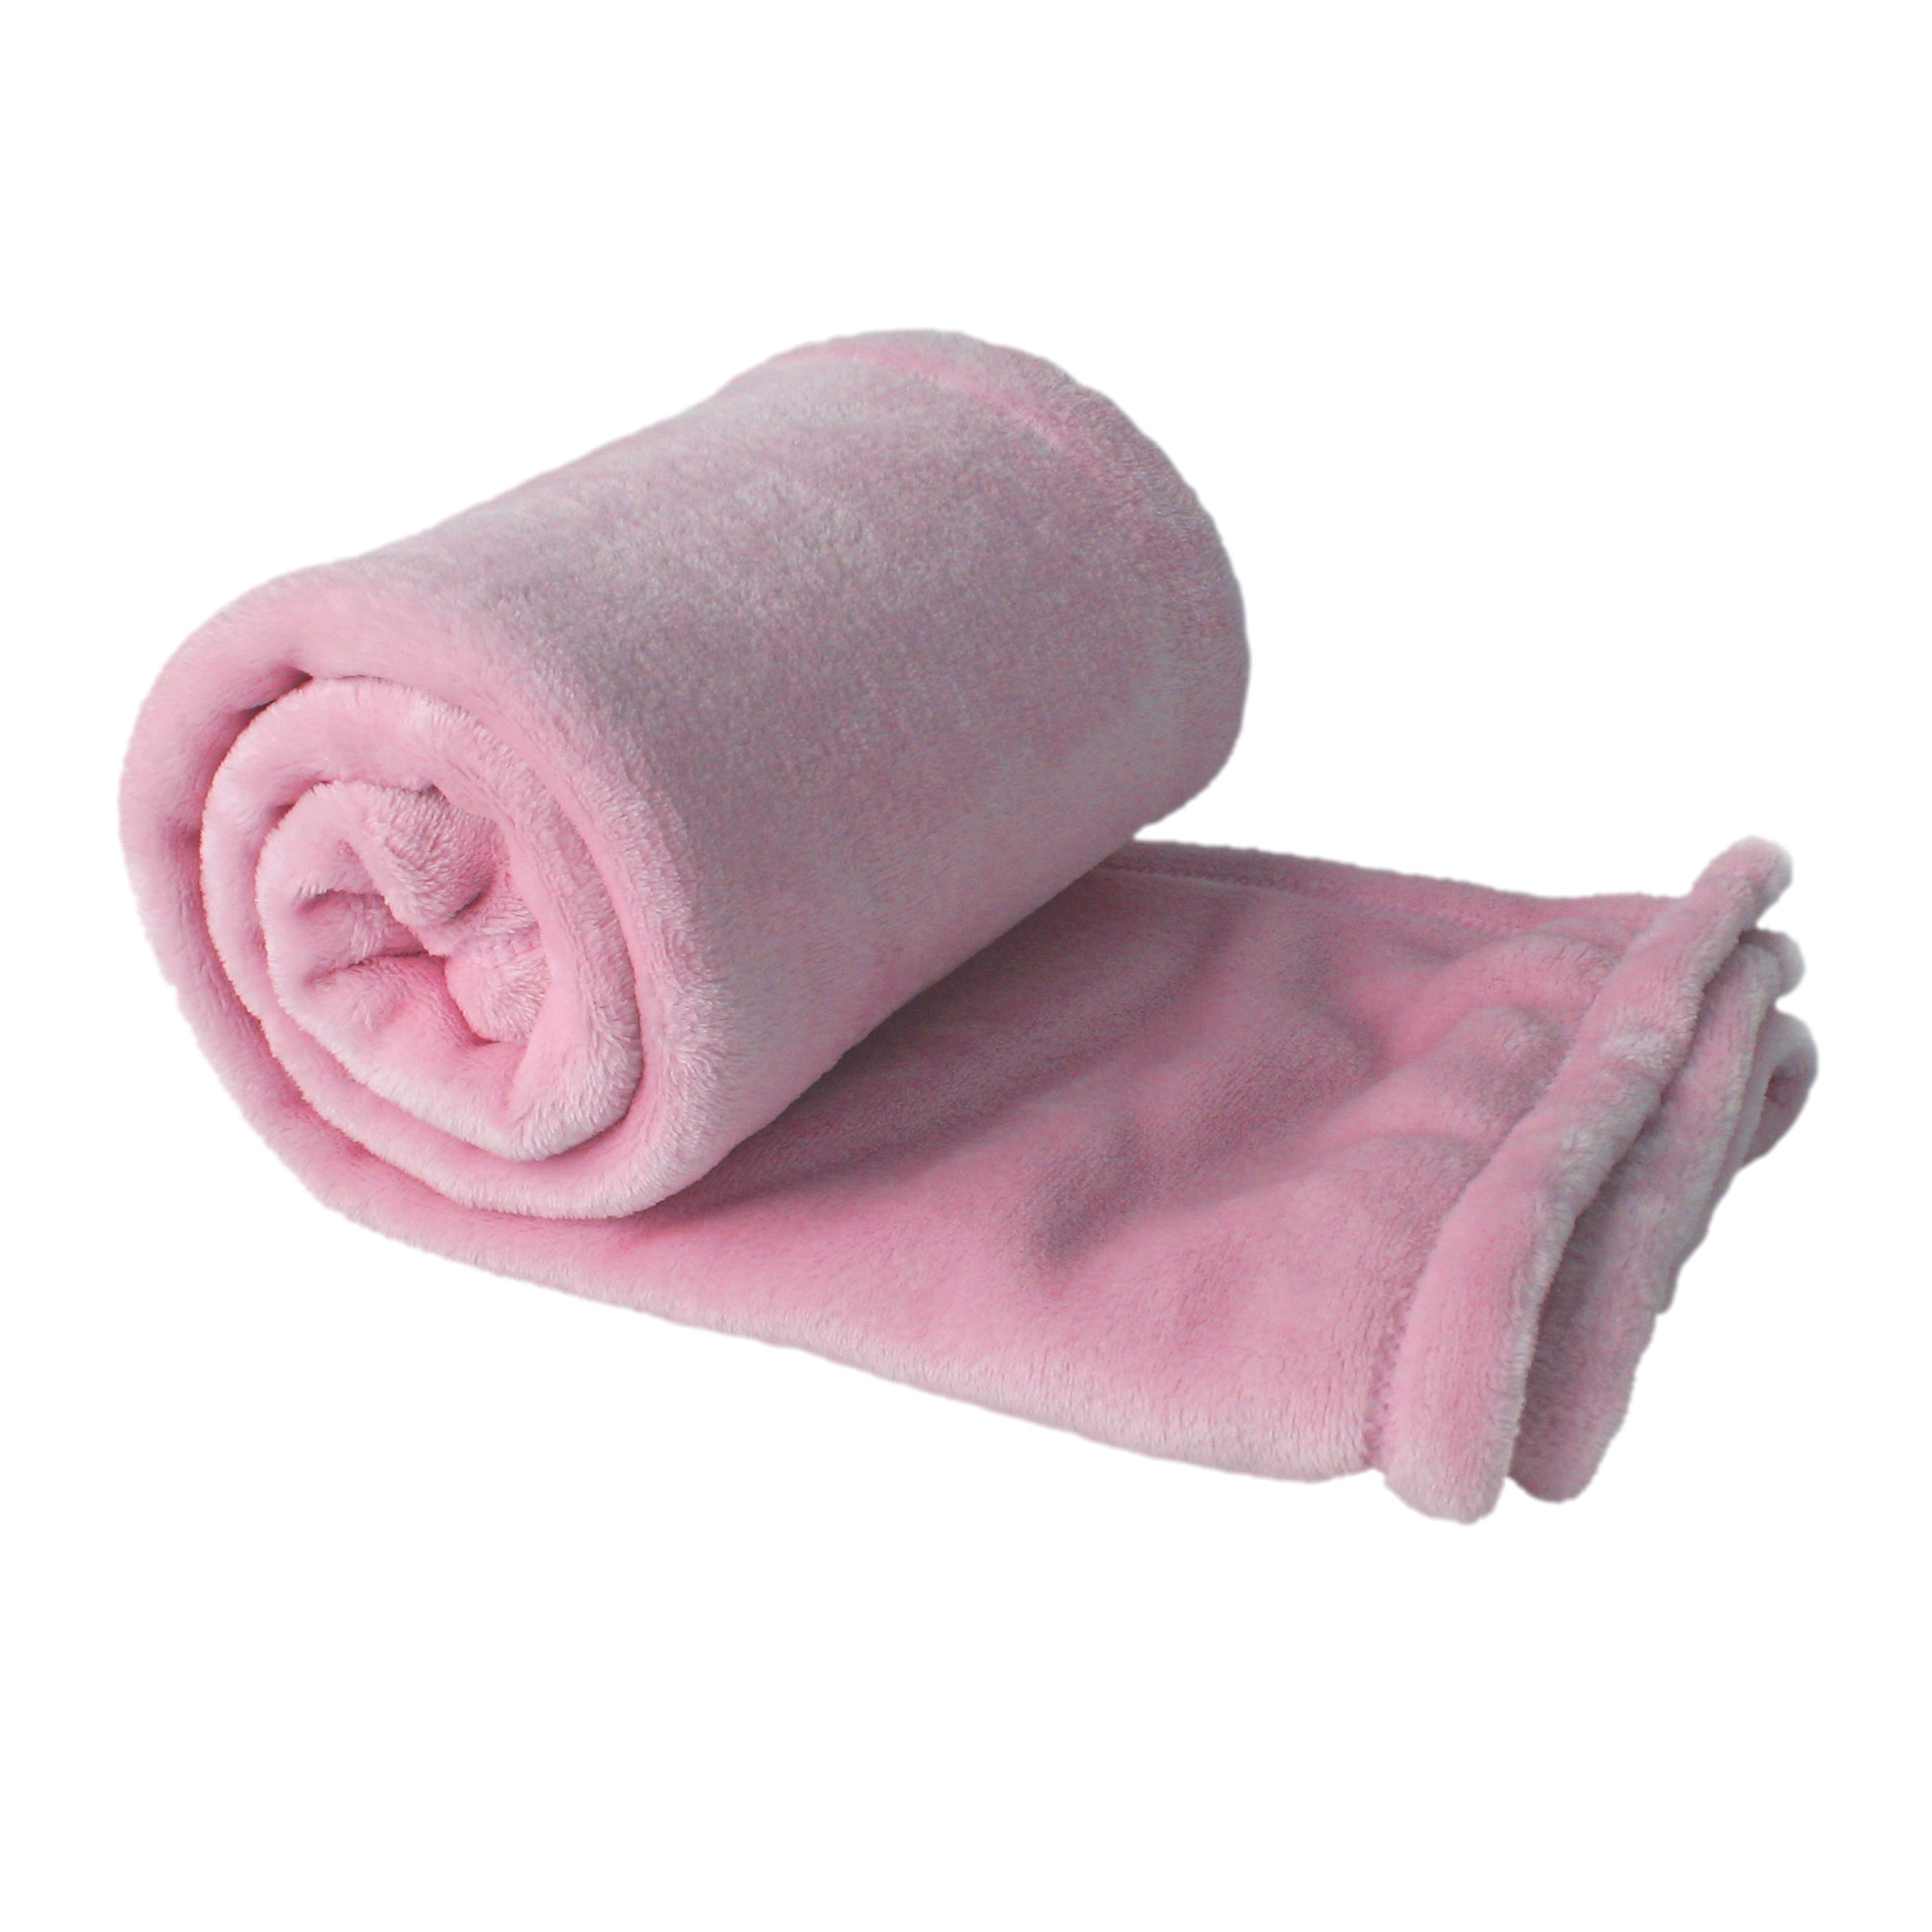 Double Sided Fleece Blankets with plush 1 New Baby Blanket #BB01 #BB010 